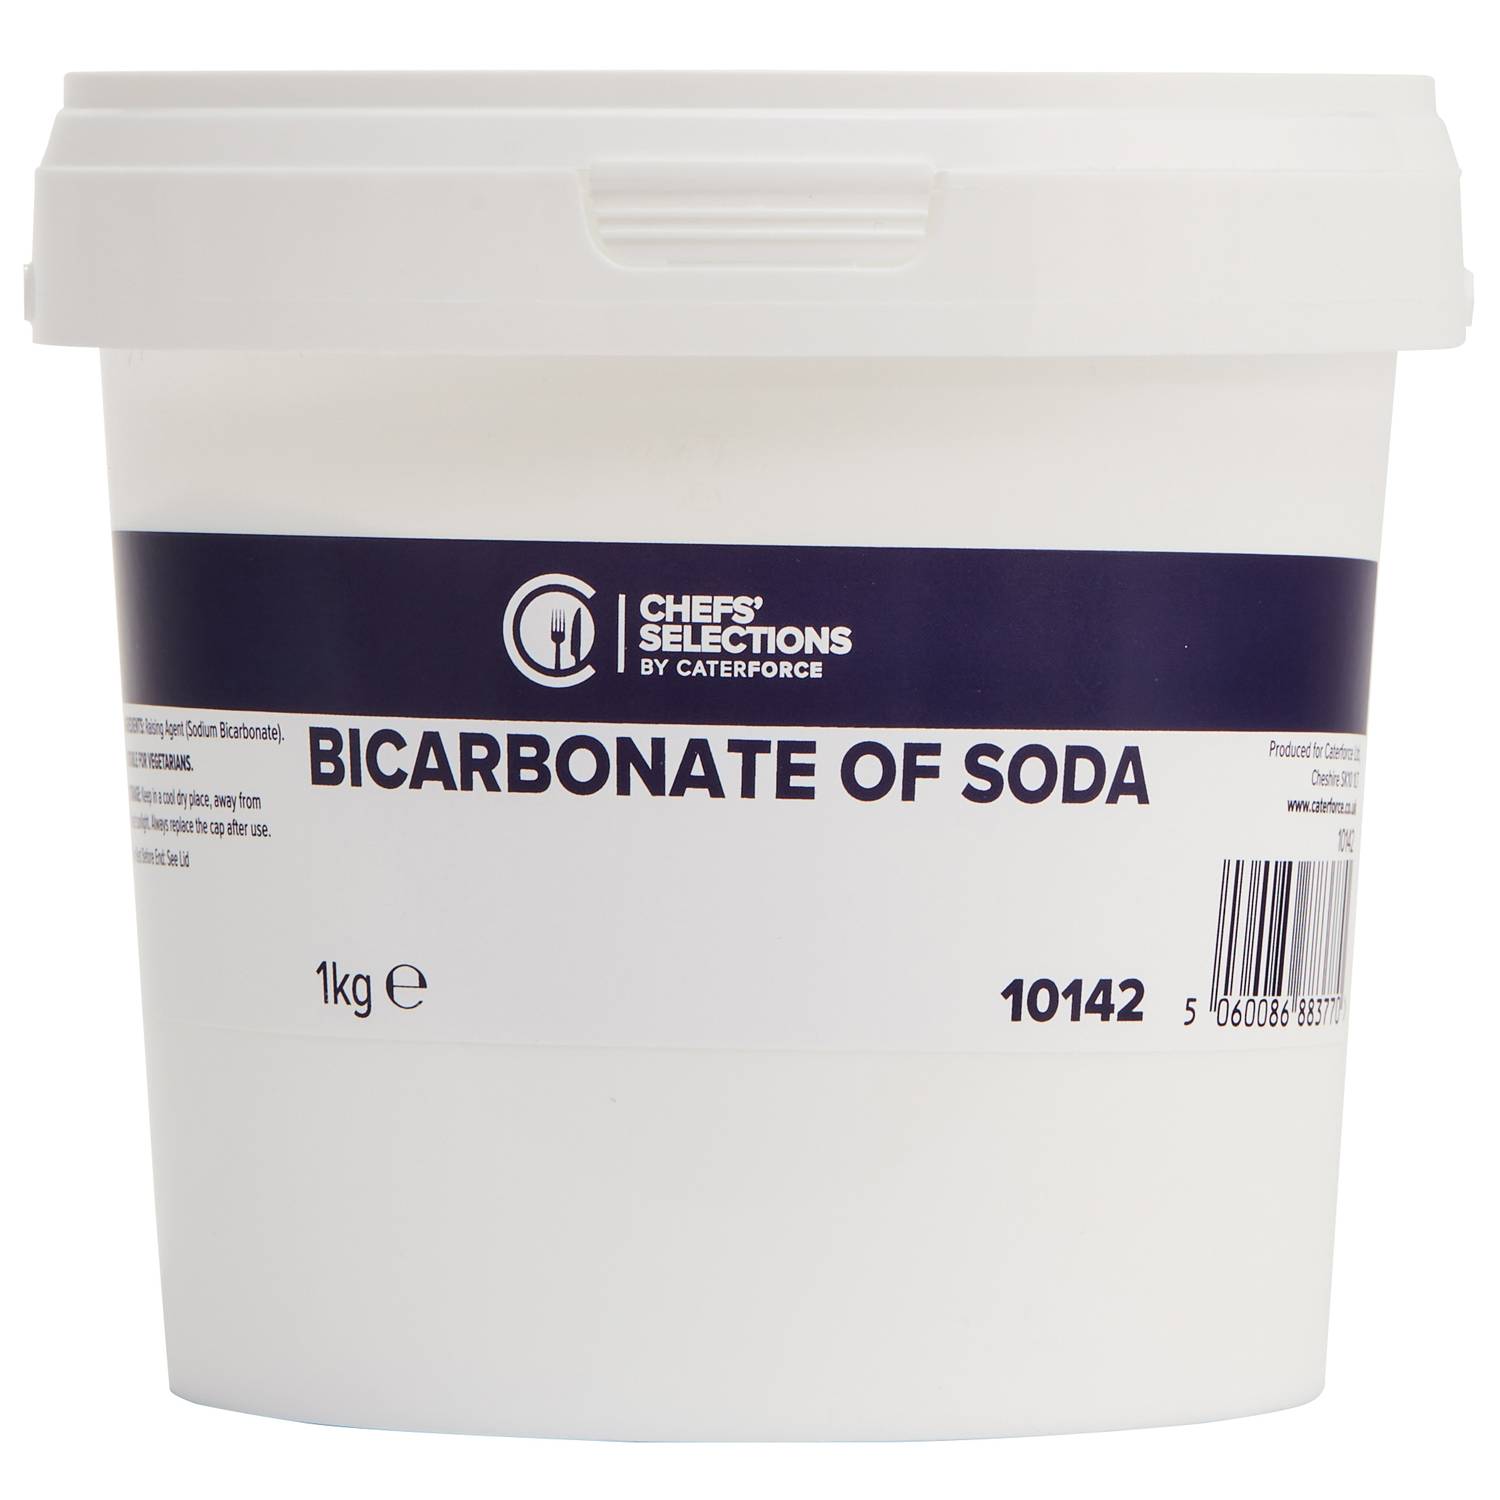 Chefs’ Selections Bicarbonate Of Soda (6 x 1000g)